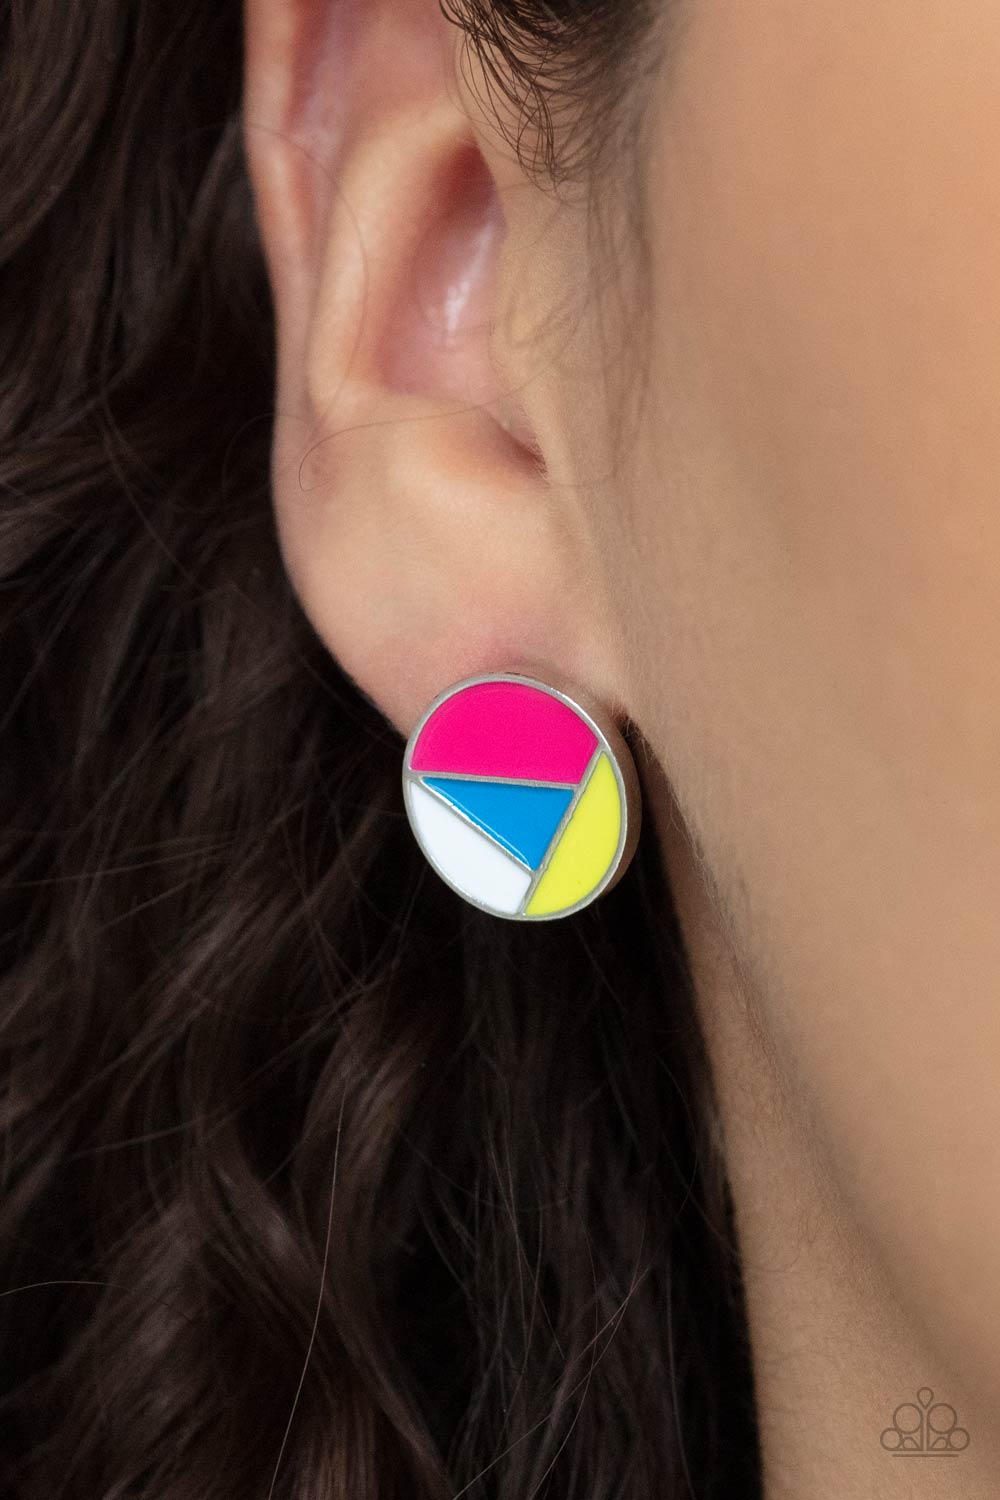 Paparazzi Accessories Artistic Experience - Multi Earrings a dainty round frame is painted in pink, blue, yellow, and white geometric sections, creating an abstract display. Earring attaches to a standard post fitting.  Sold as one pair of post earrings.